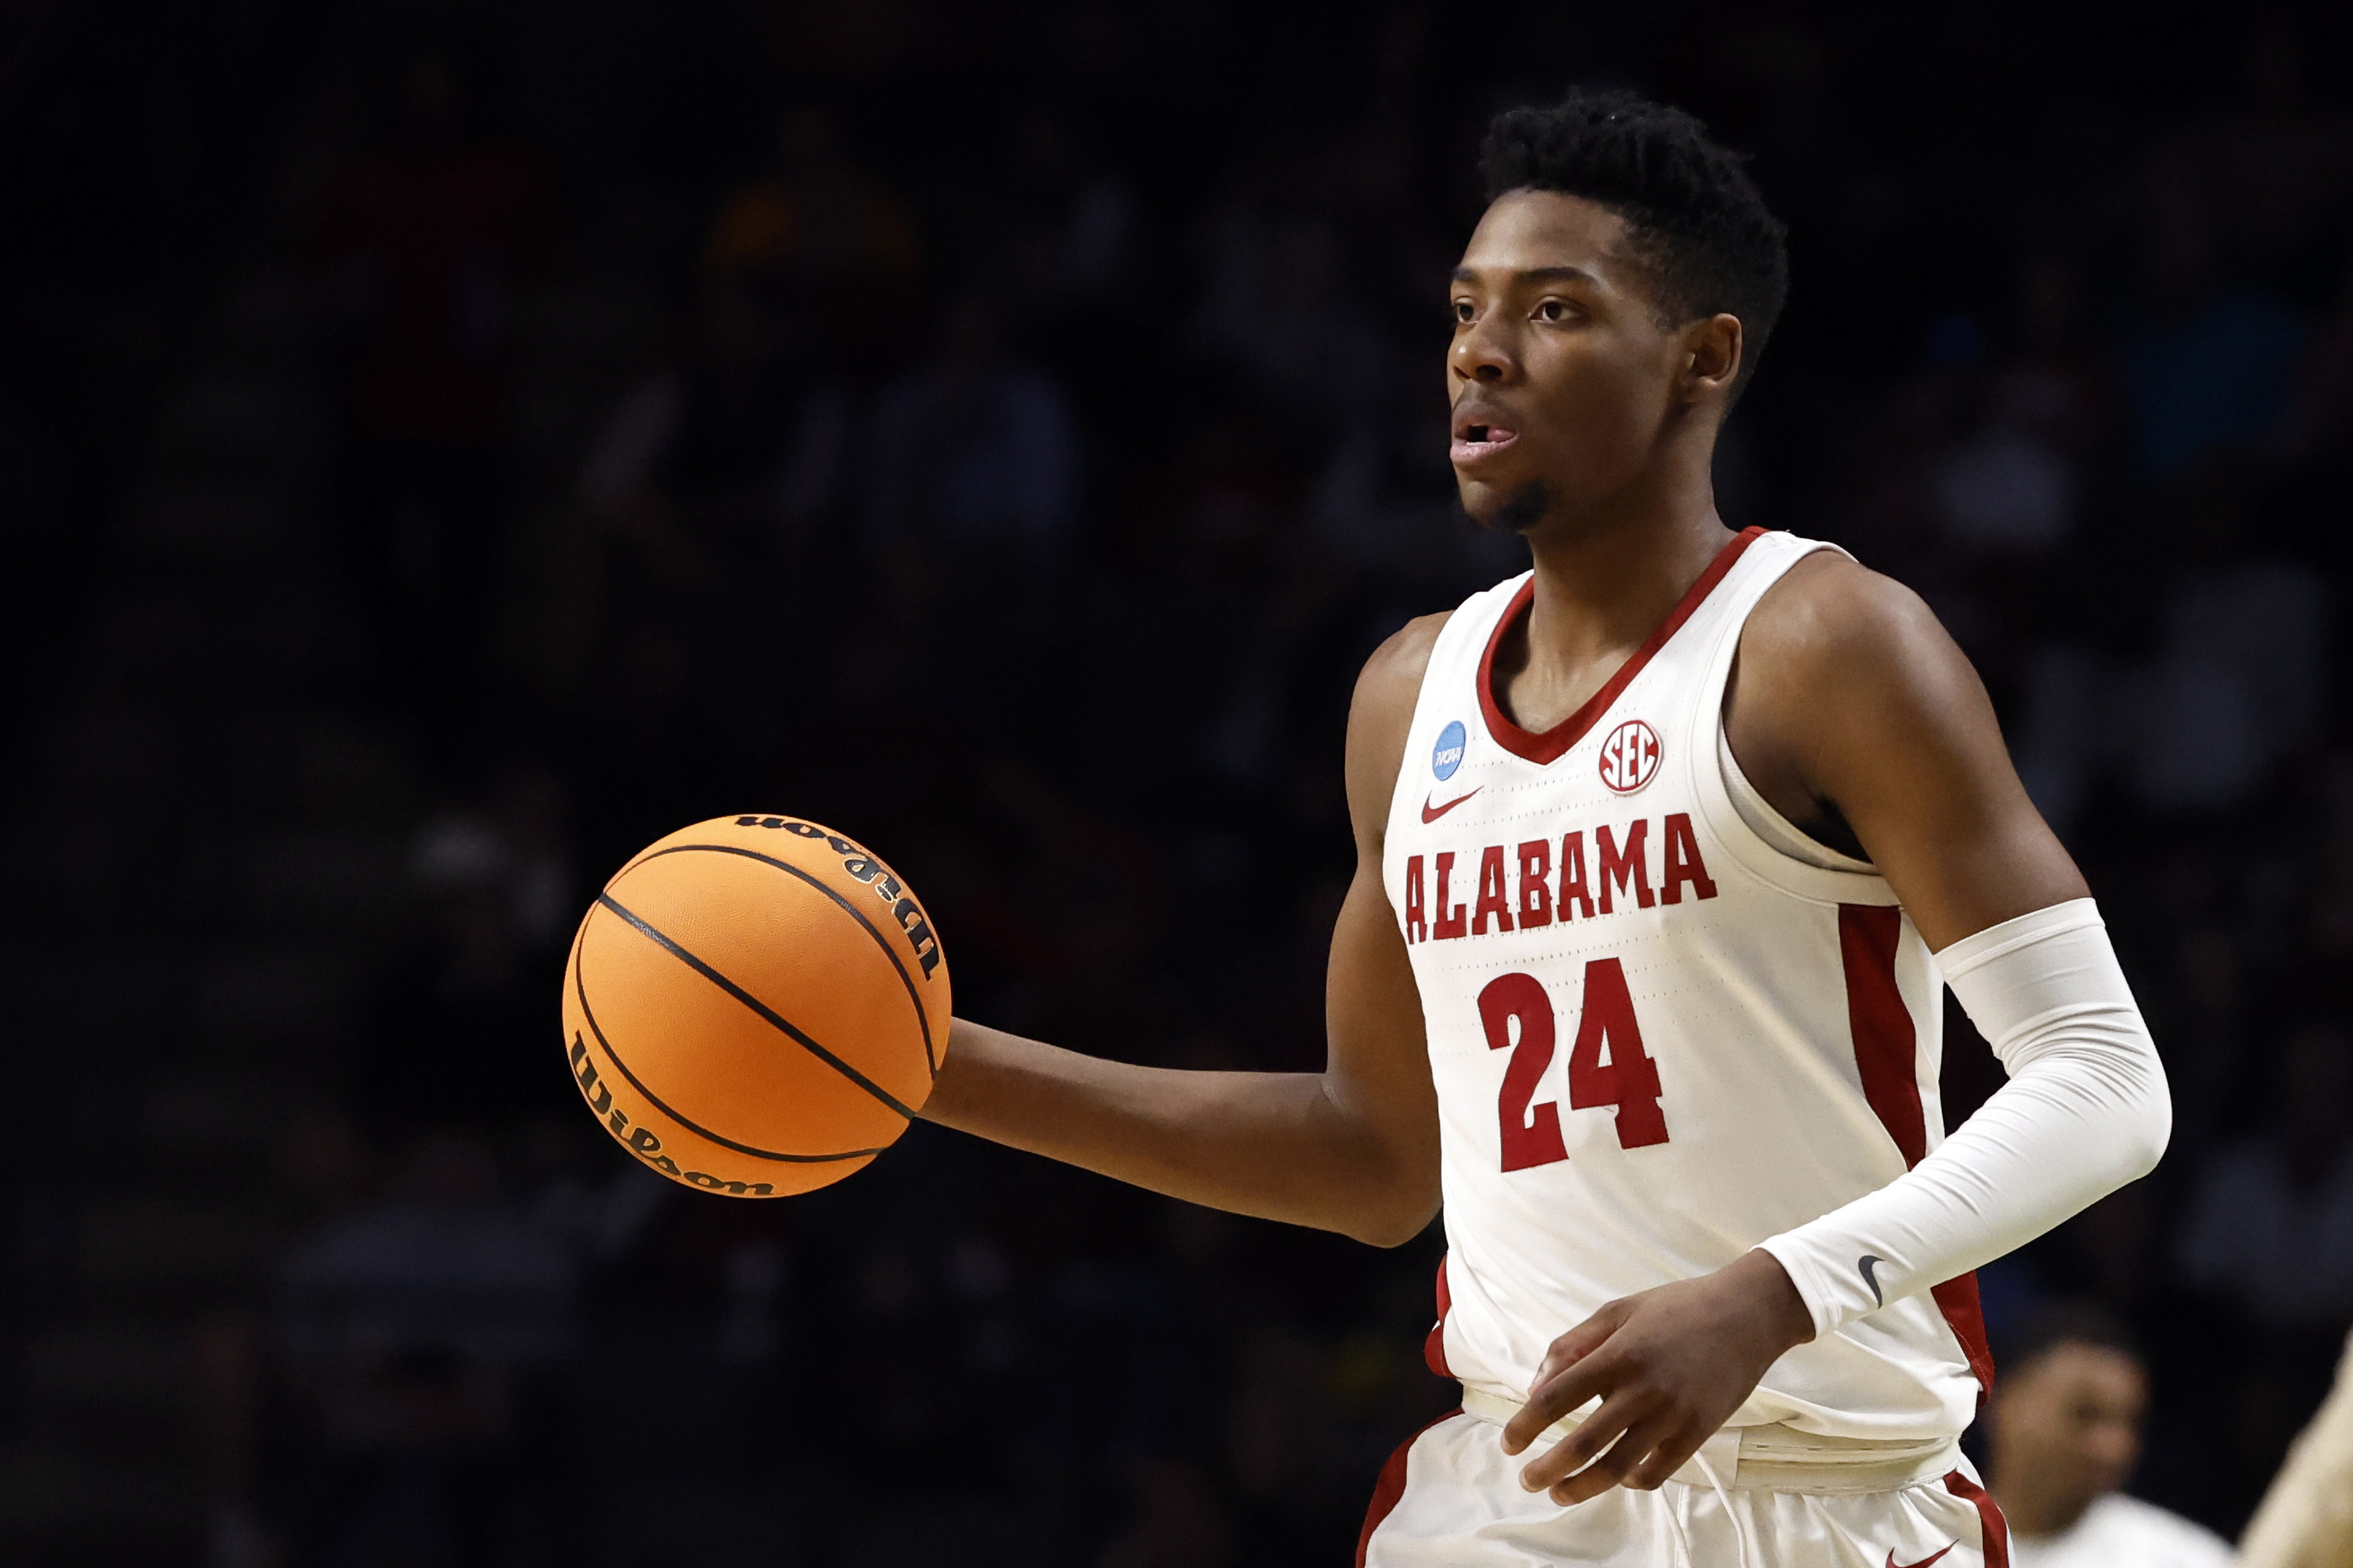 Alabama vs Maryland basketball free live stream, TV channel for Round 2 game (3/18/2023)